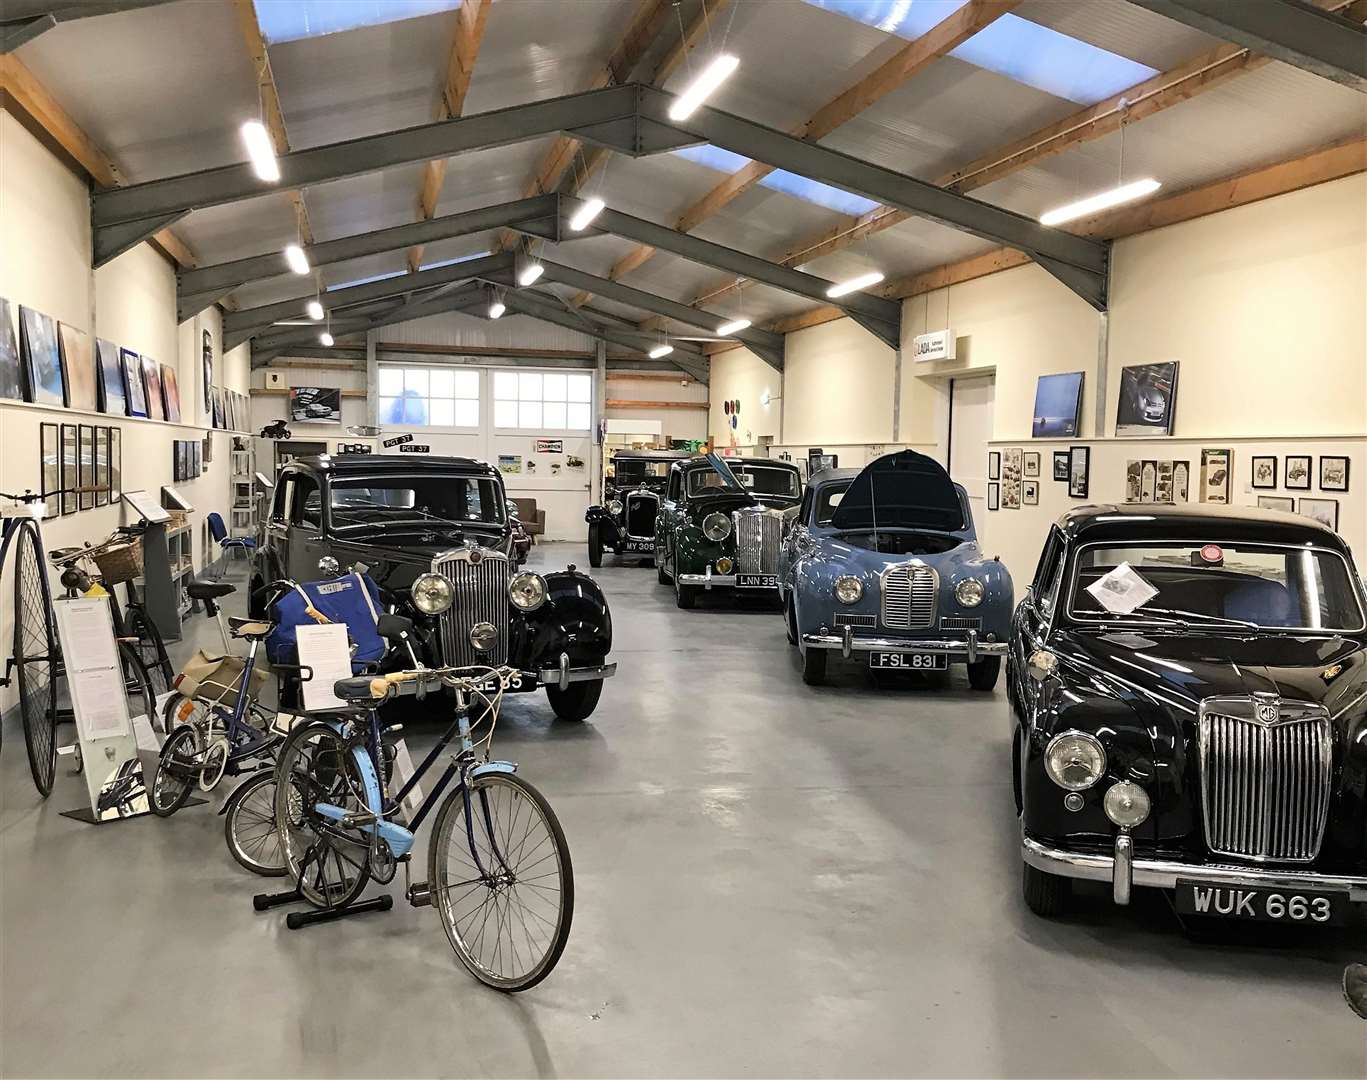 The consultation took place at the Halkirk Heritage and Vintage Motor Centre.